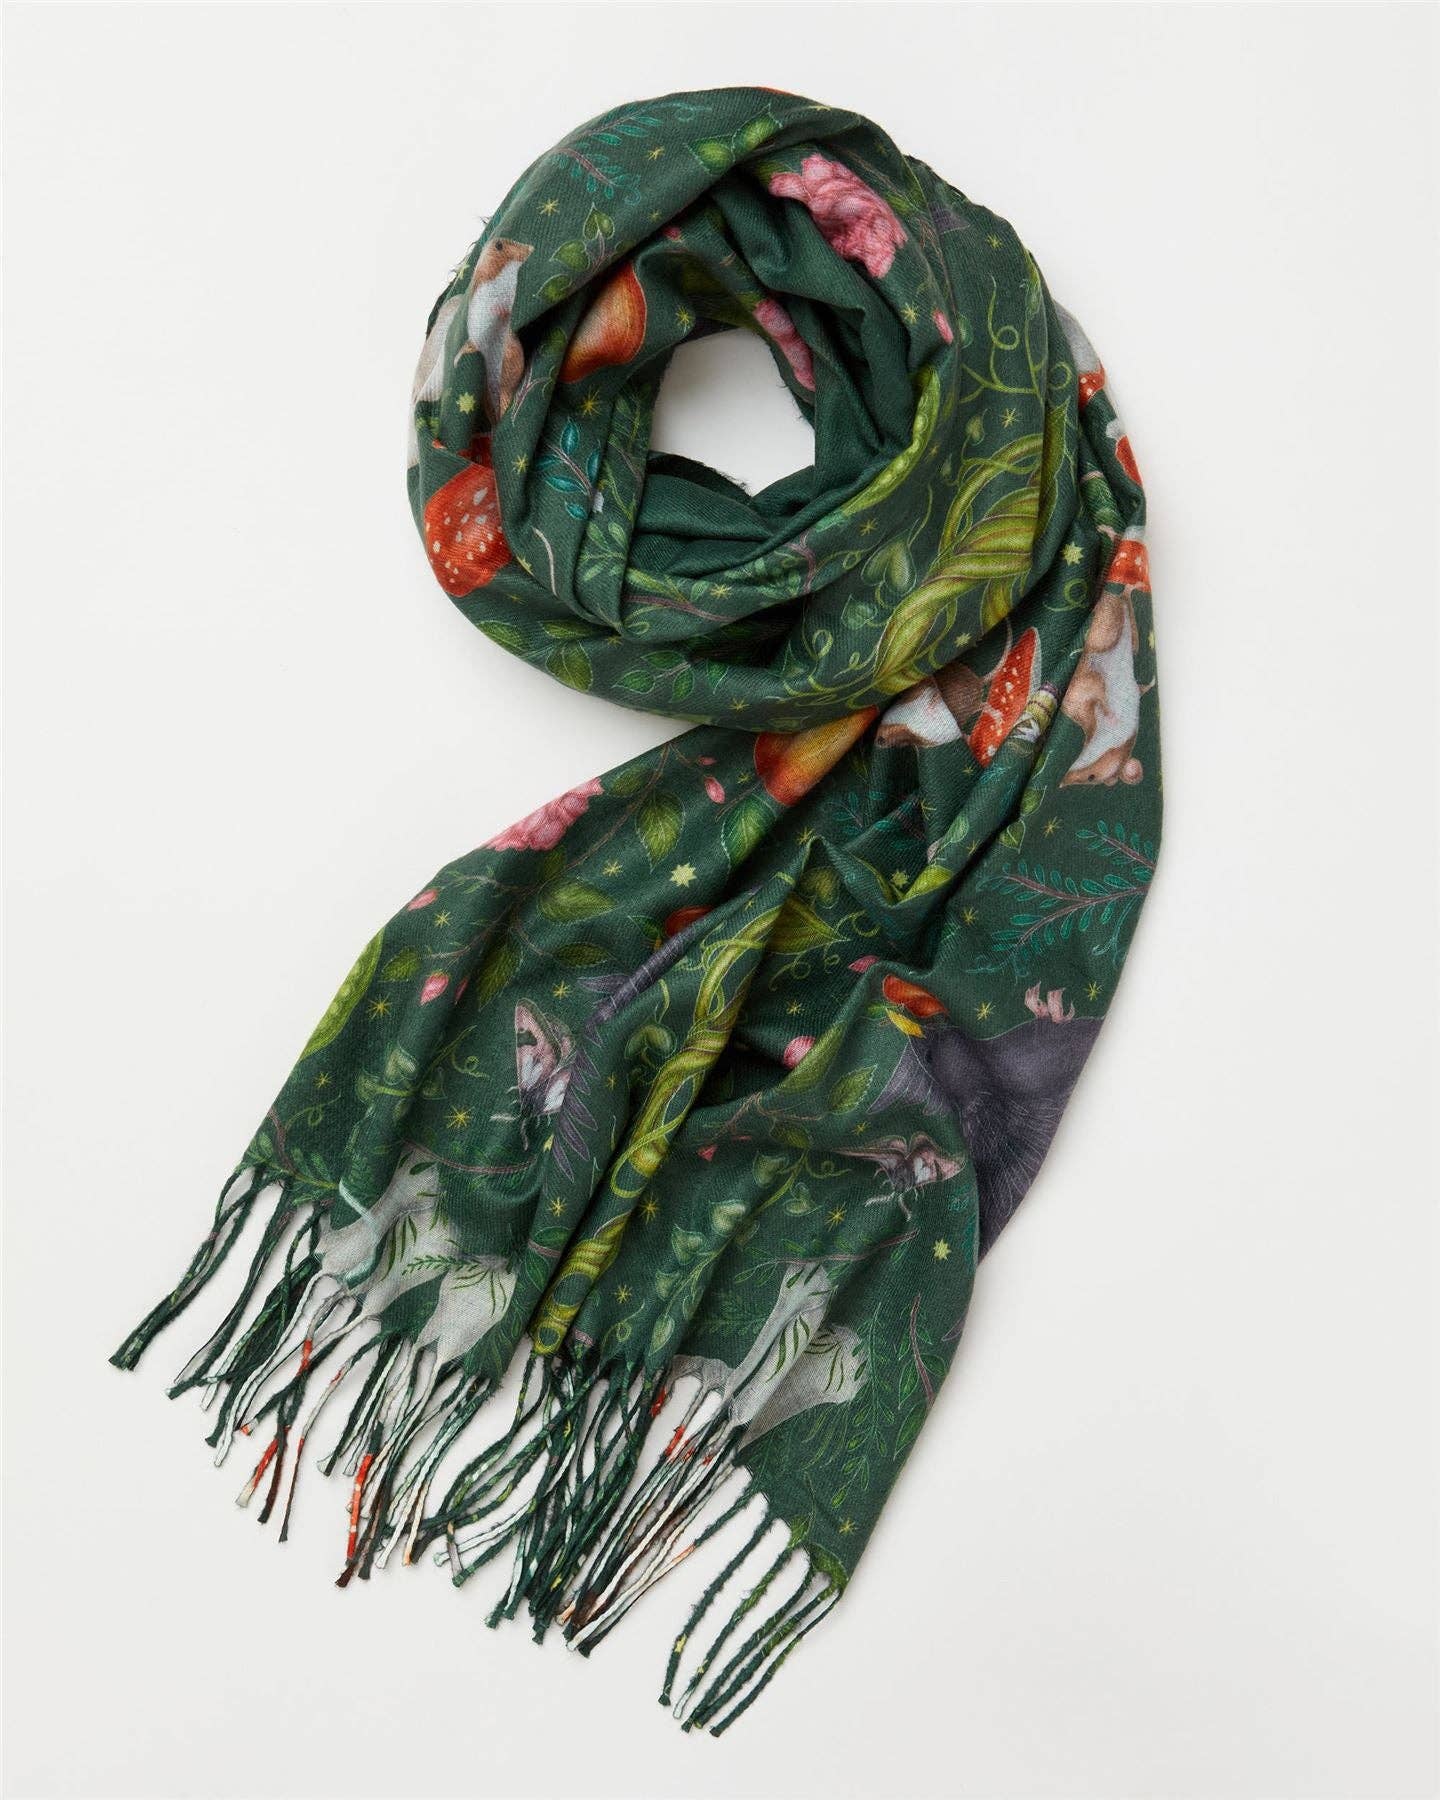 Fable England where to buy. Enniskillen Shopping Centre. Catherine Rowe's Into The Woods Scarf